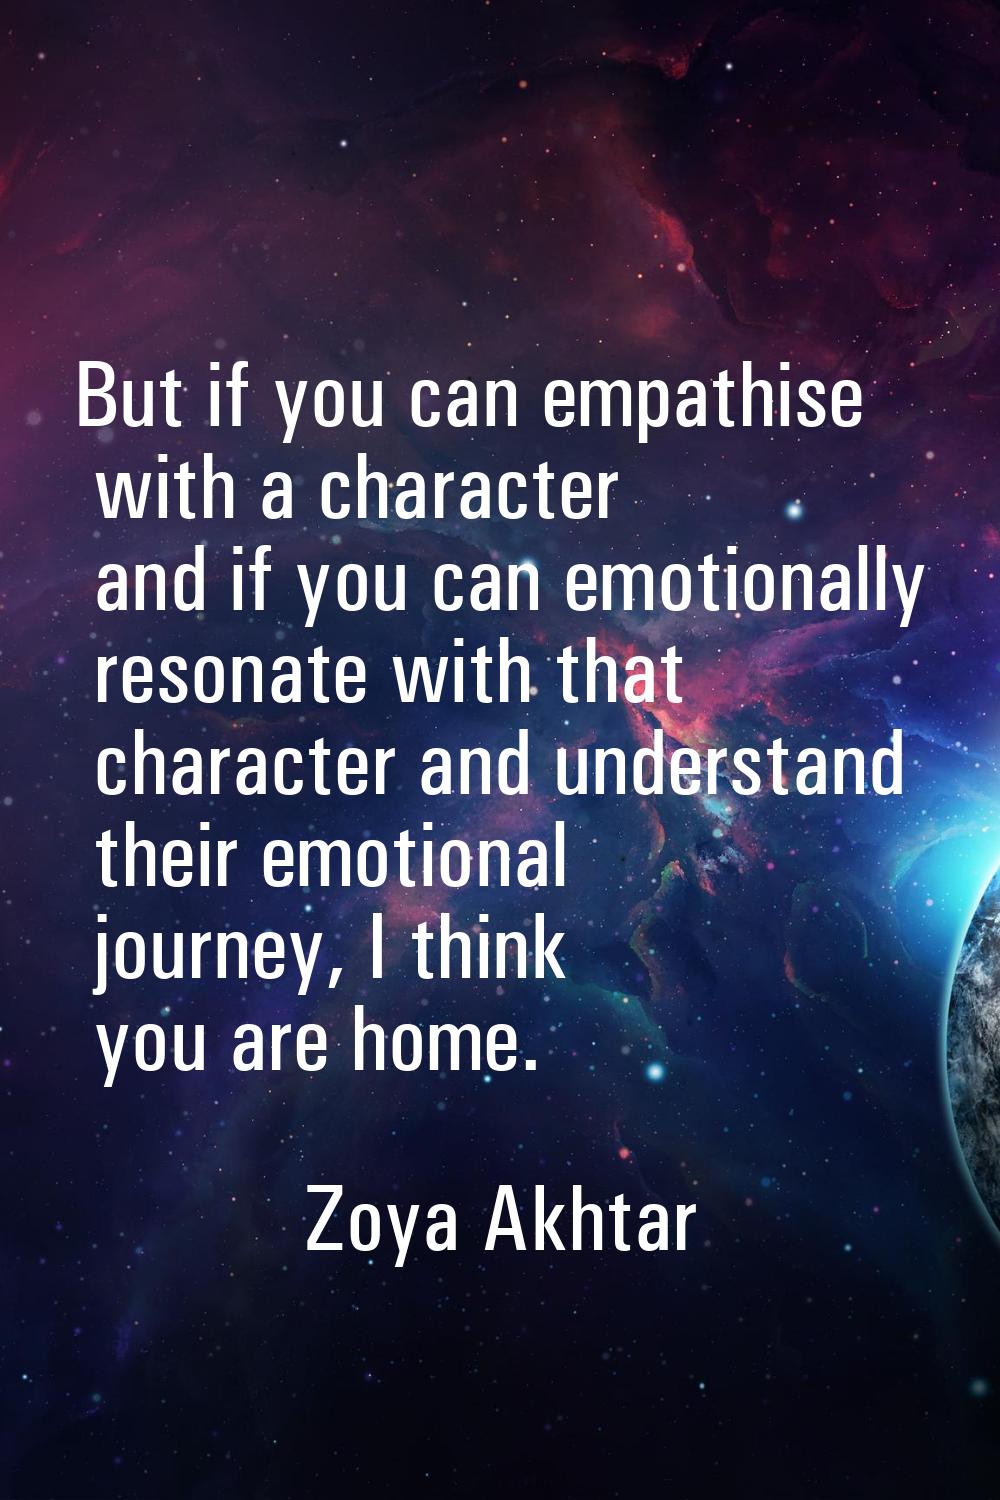 But if you can empathise with a character and if you can emotionally resonate with that character a